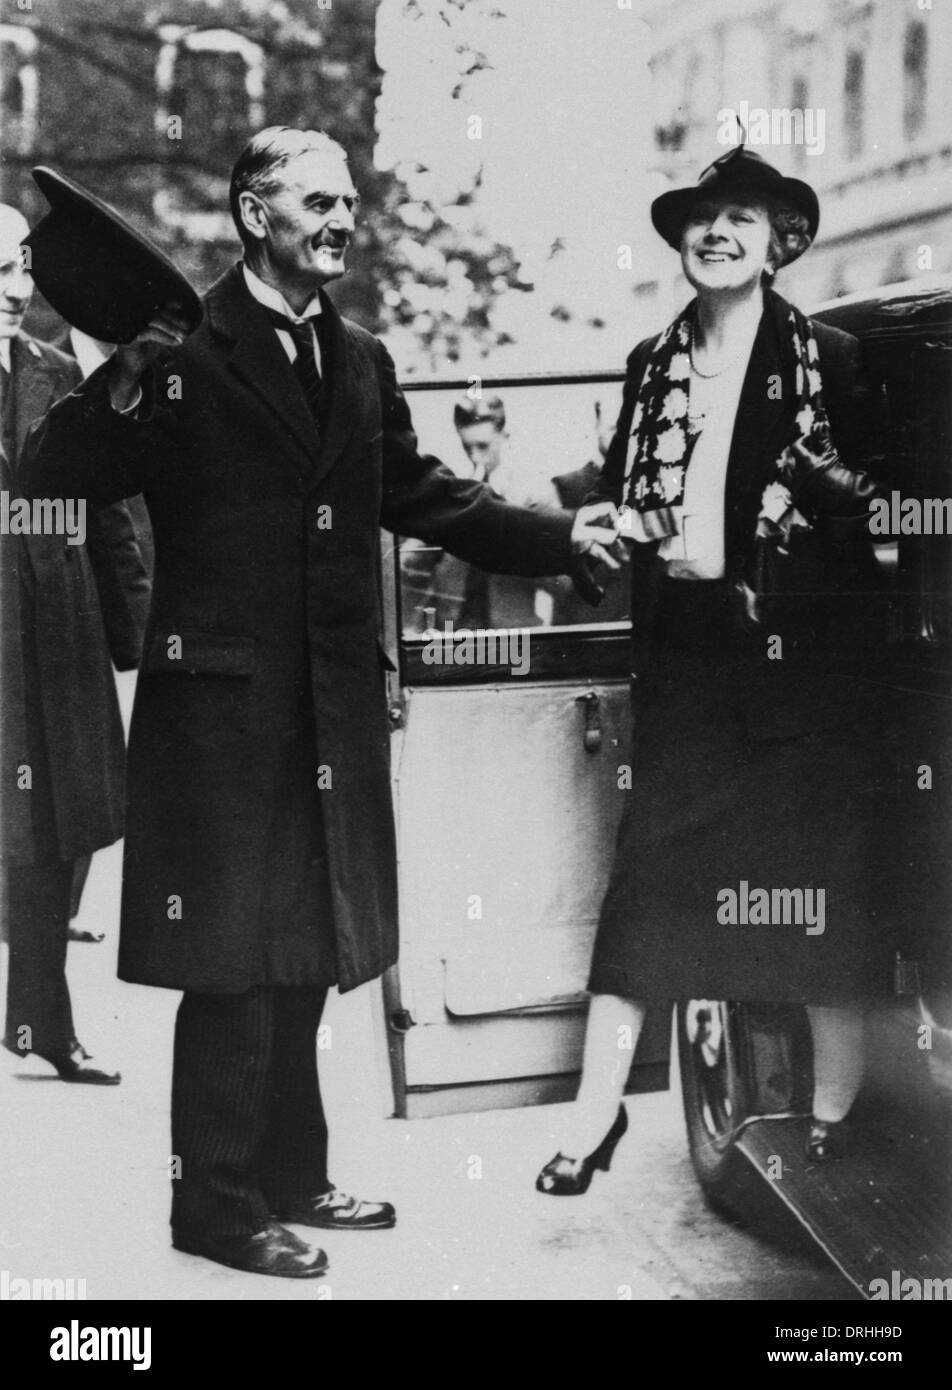 Neville Chamberlain helping his wife out of a car Stock Photo